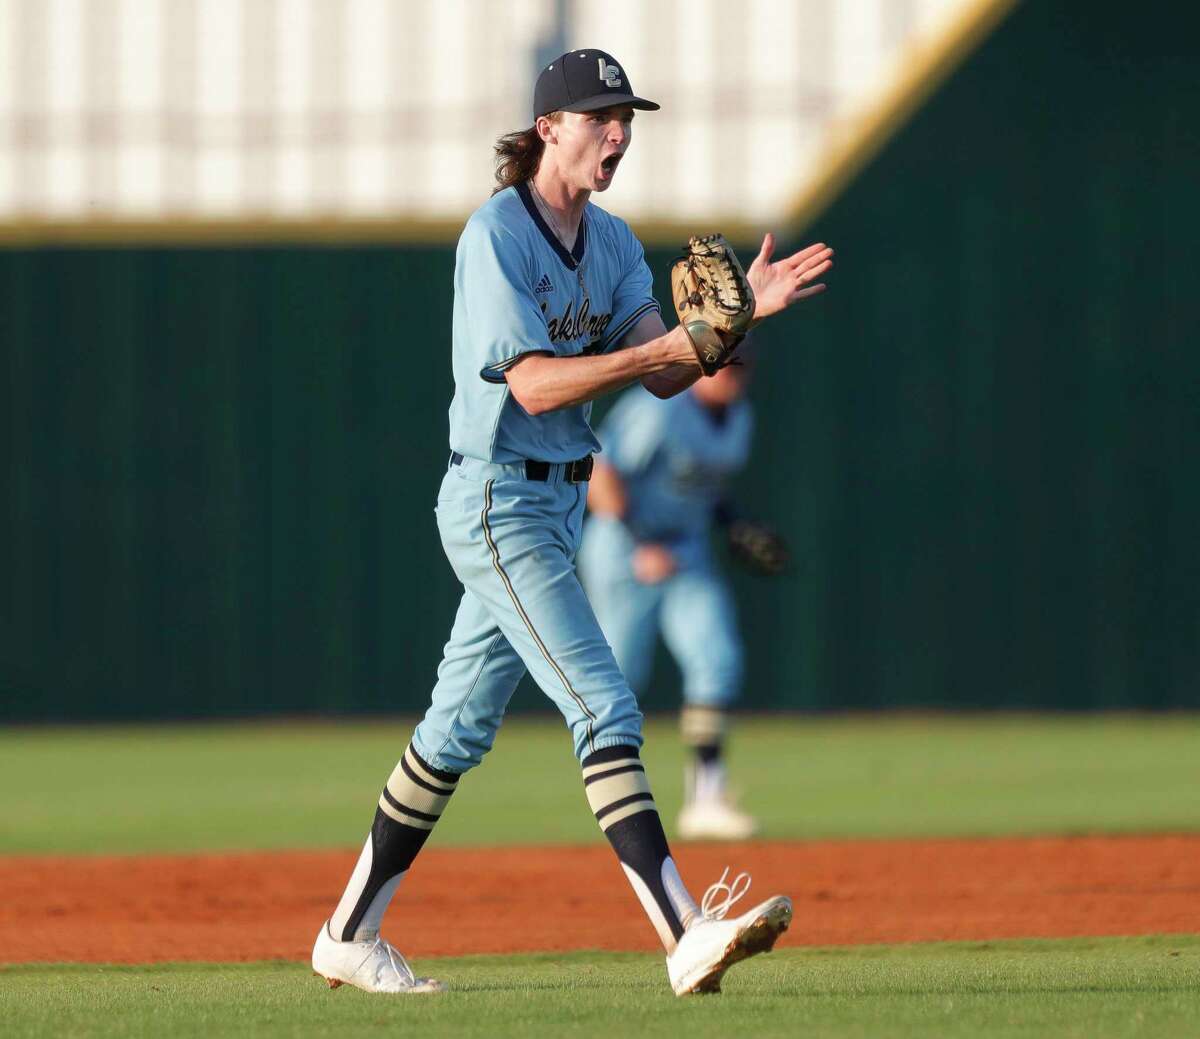 Lake Creek starting pitcher Shane Sdao (1) reacts after getting Caylon Dygert #9 of Magnolia West to ground out to end the top of the first inning of Game 1 of a Region II-6A high school baseball bi-district playoff series at Lake Creek High School, Friday, May 6, 2022, in Montgomery.